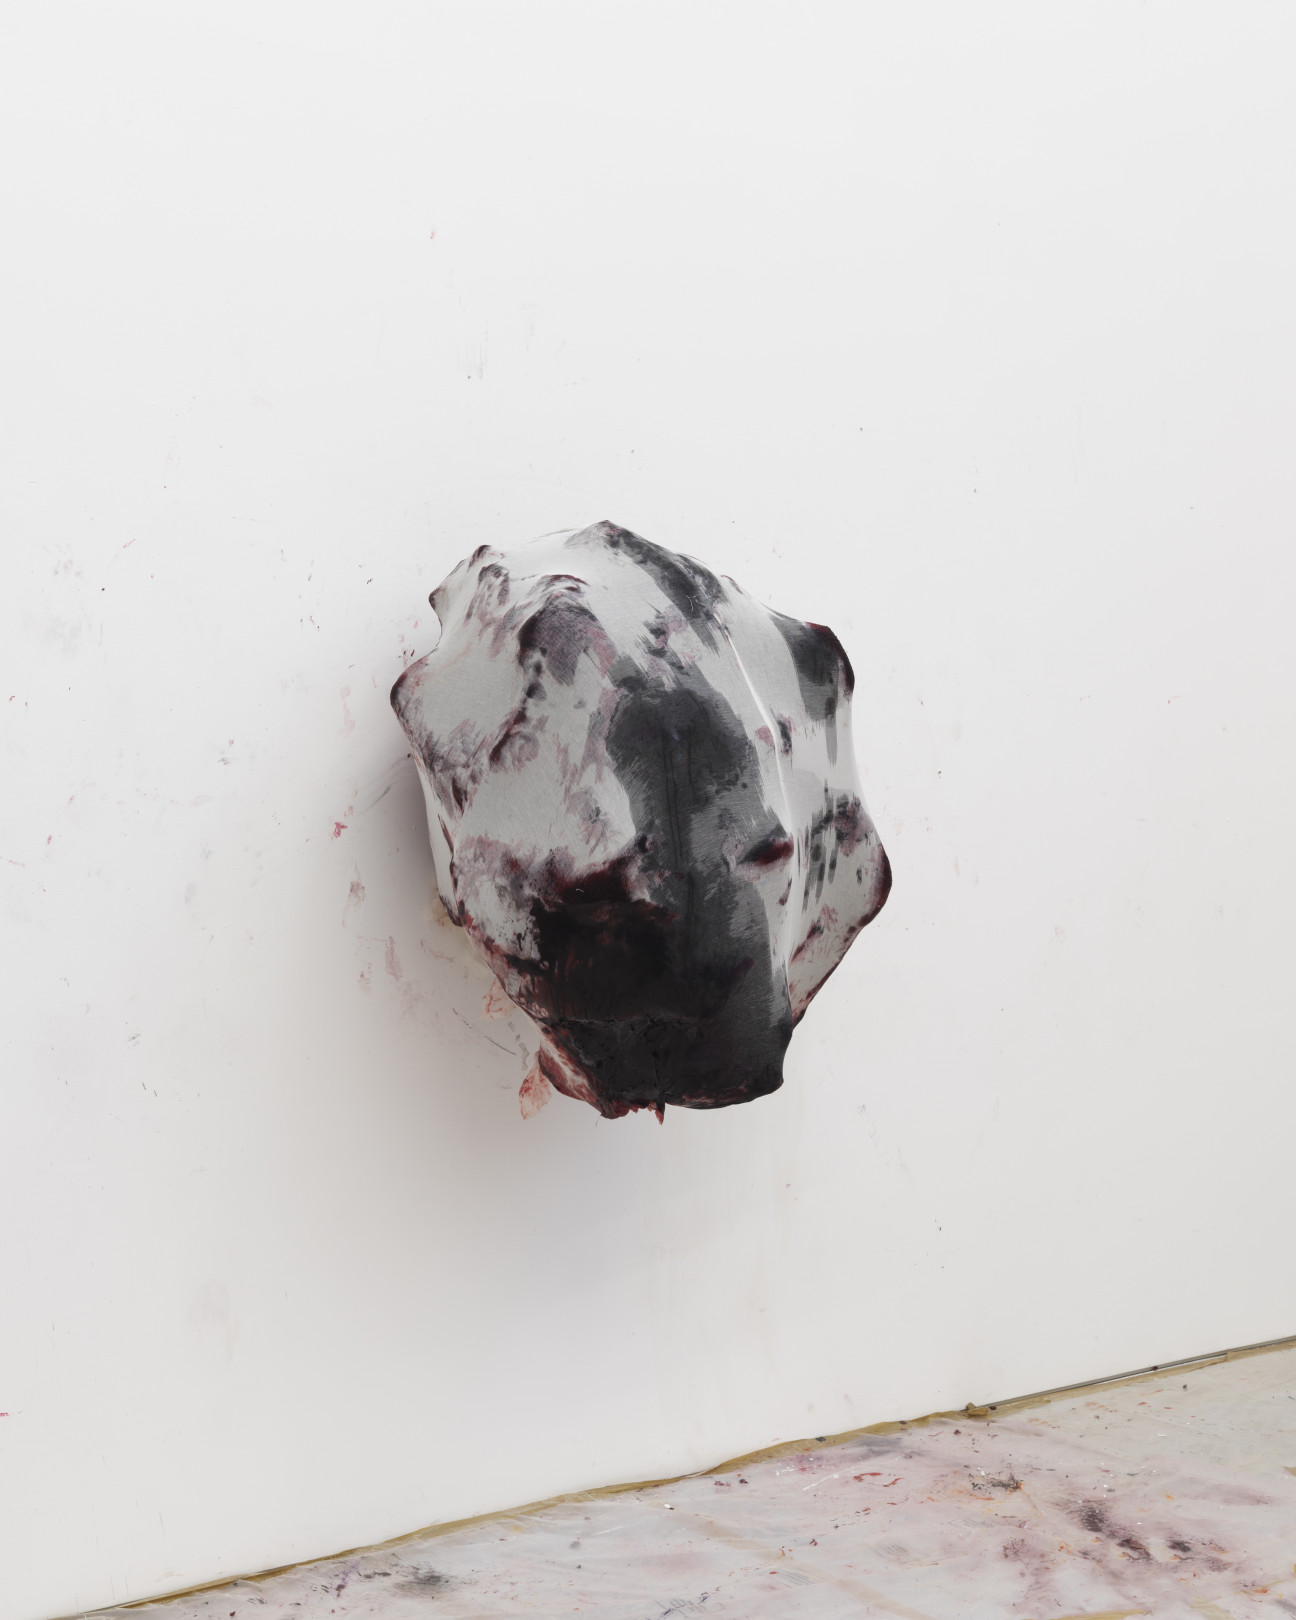 「I looking in at me」2016 / Silicone, fibreglass and gauze, 107 x 86 x 89 cm / © Anish Kapoor, 2018 / Courtesy of SCAI THE BATHHOUSE